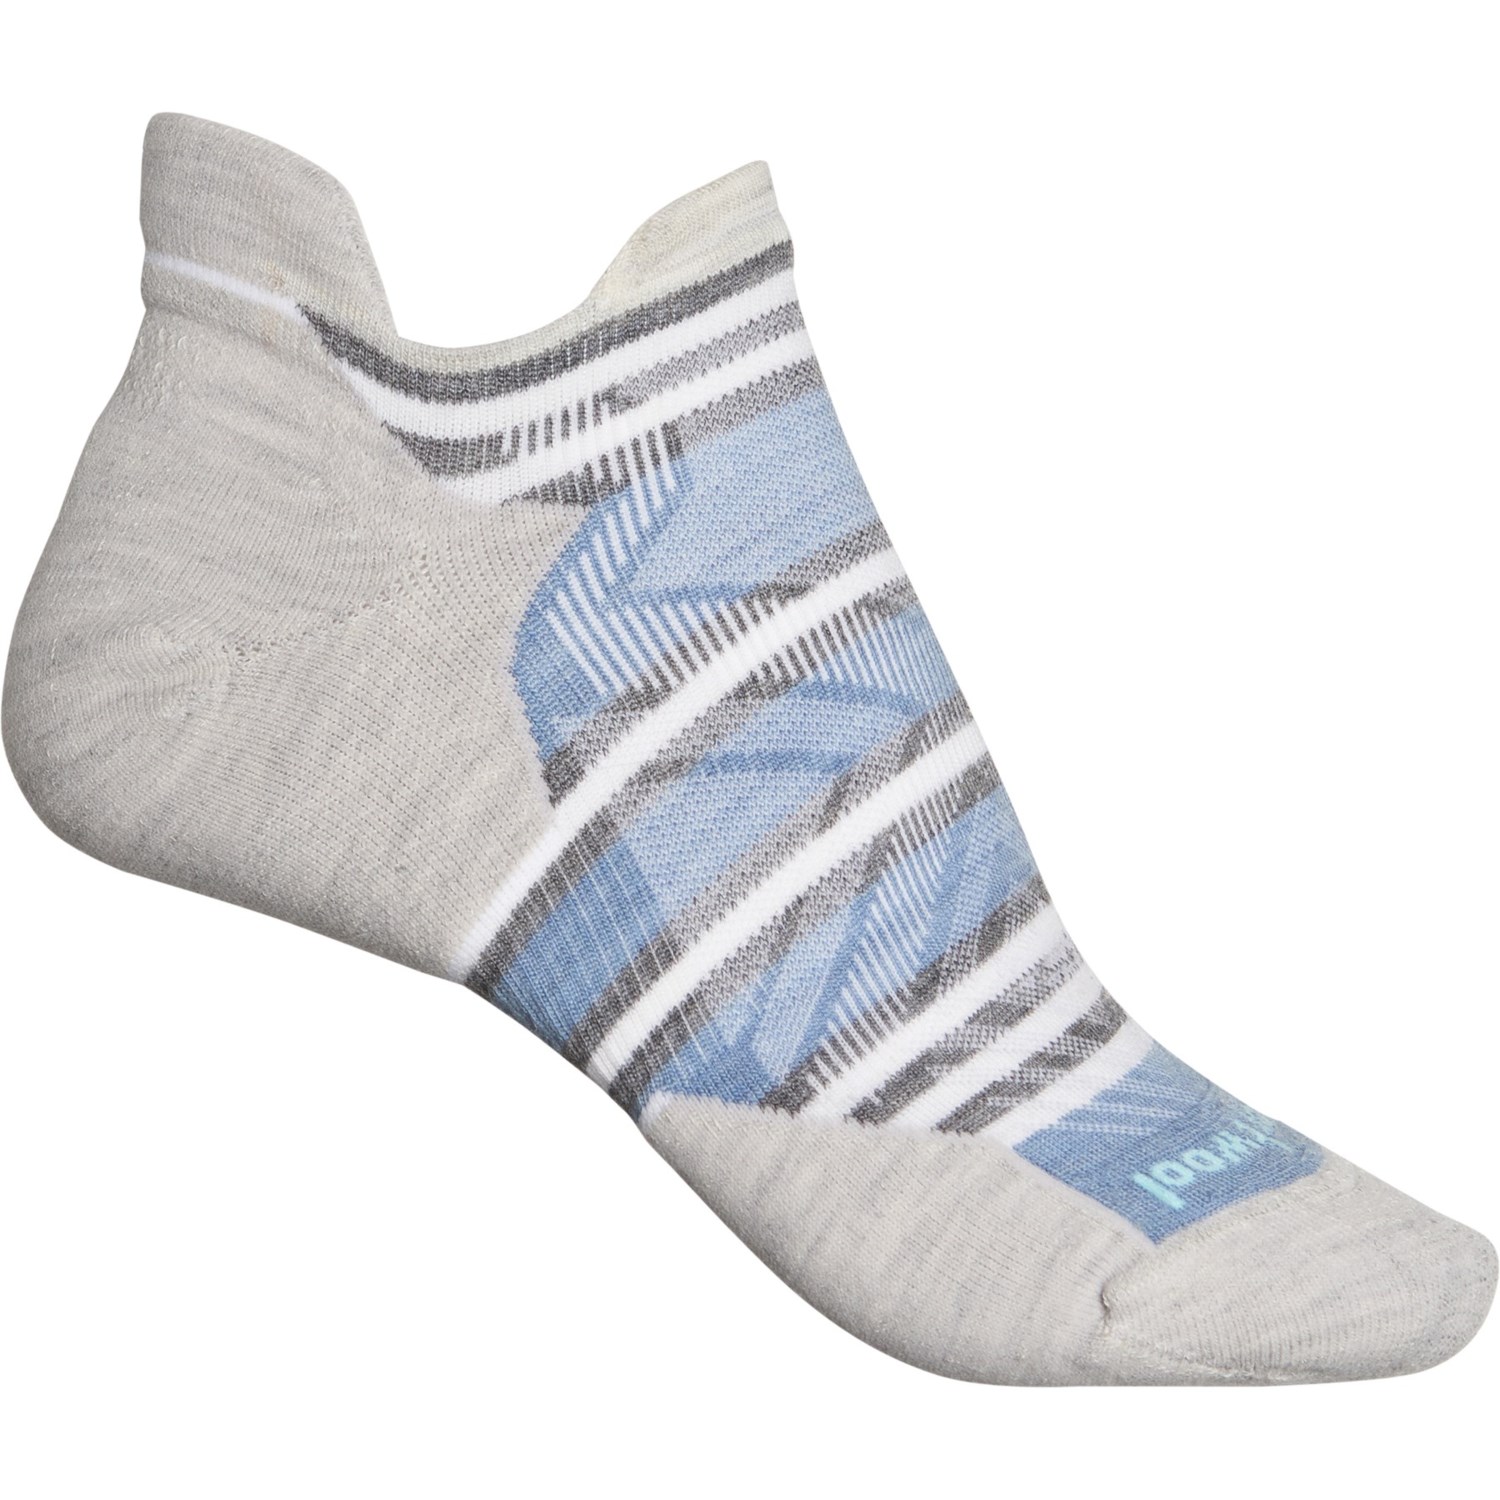 SmartWool Targeted Cushion Low-Cut Running Socks (For Women)